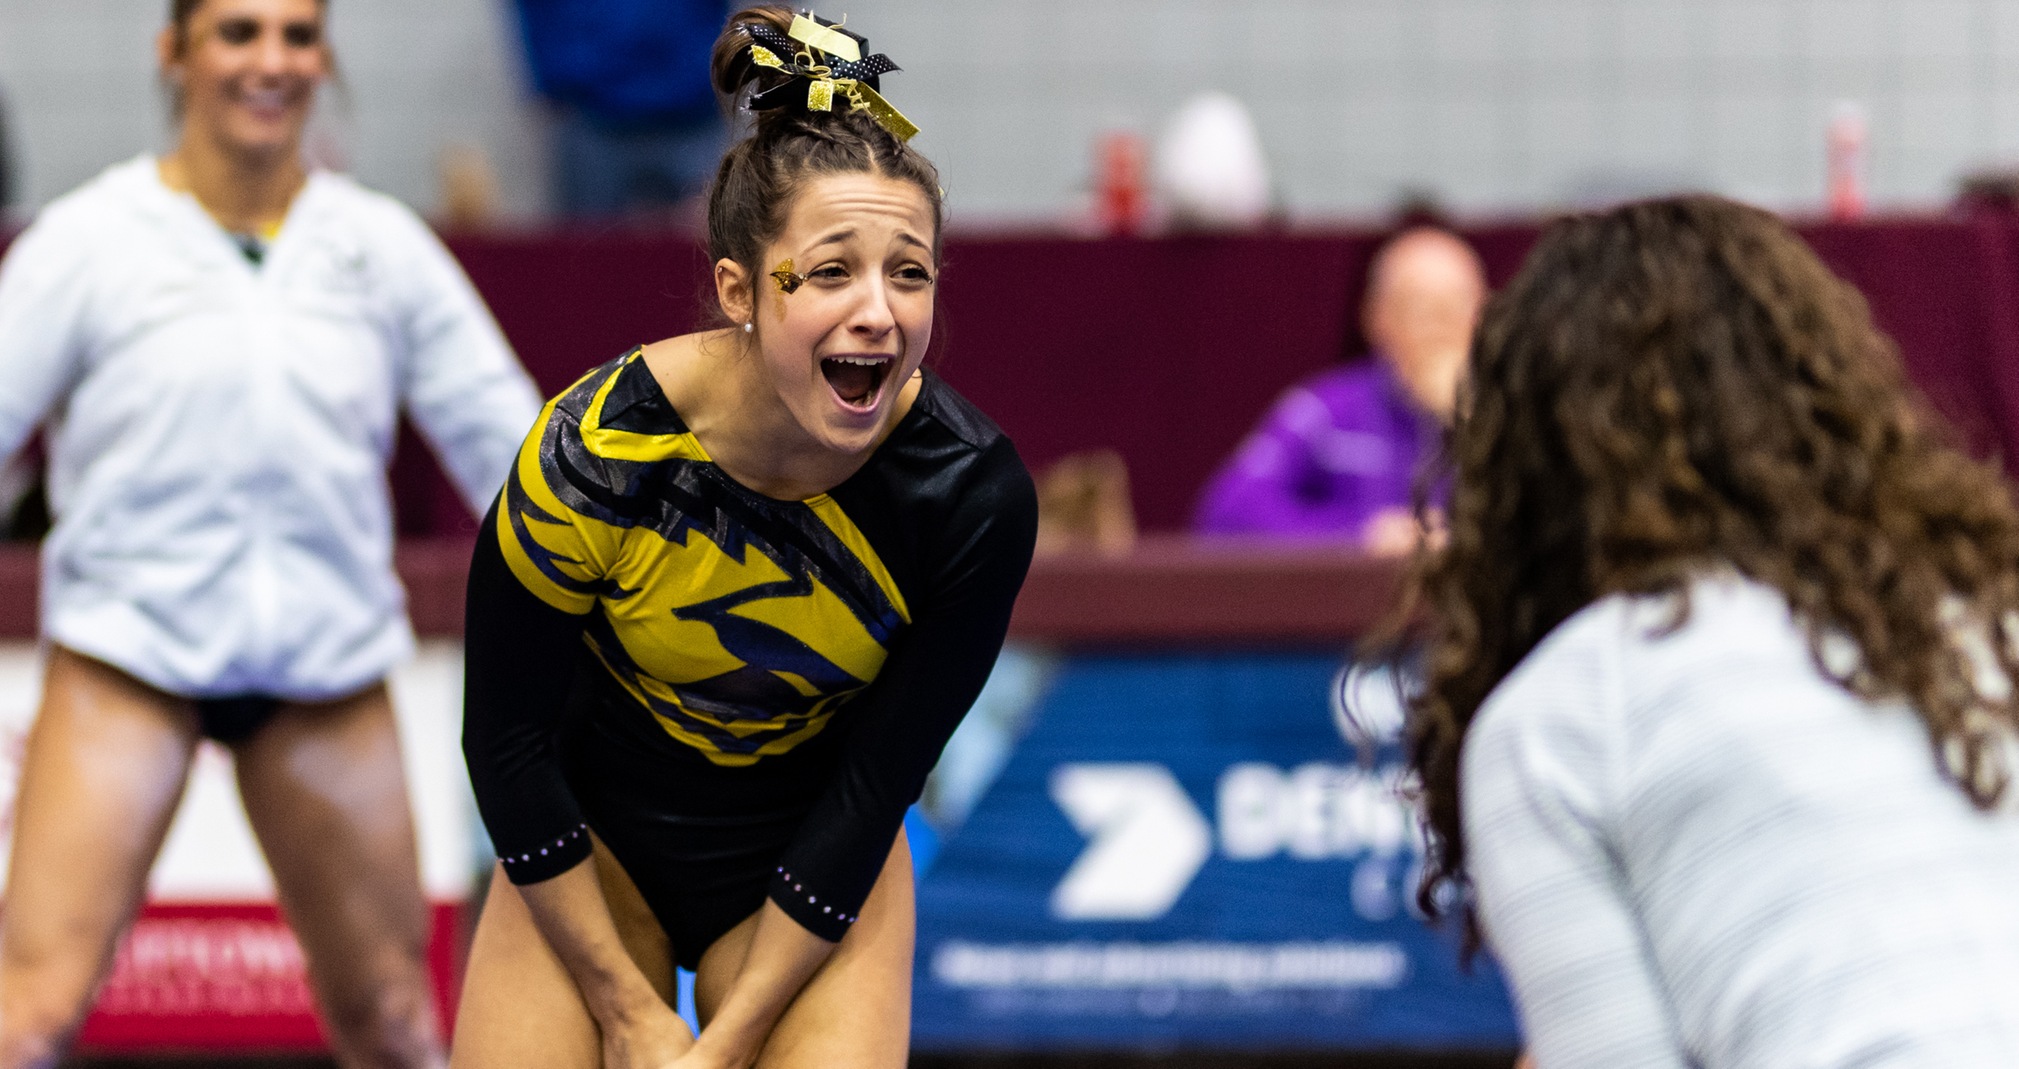 Olivia Keller celebrates after recording her second-place score of 9.775 on the balance beam.